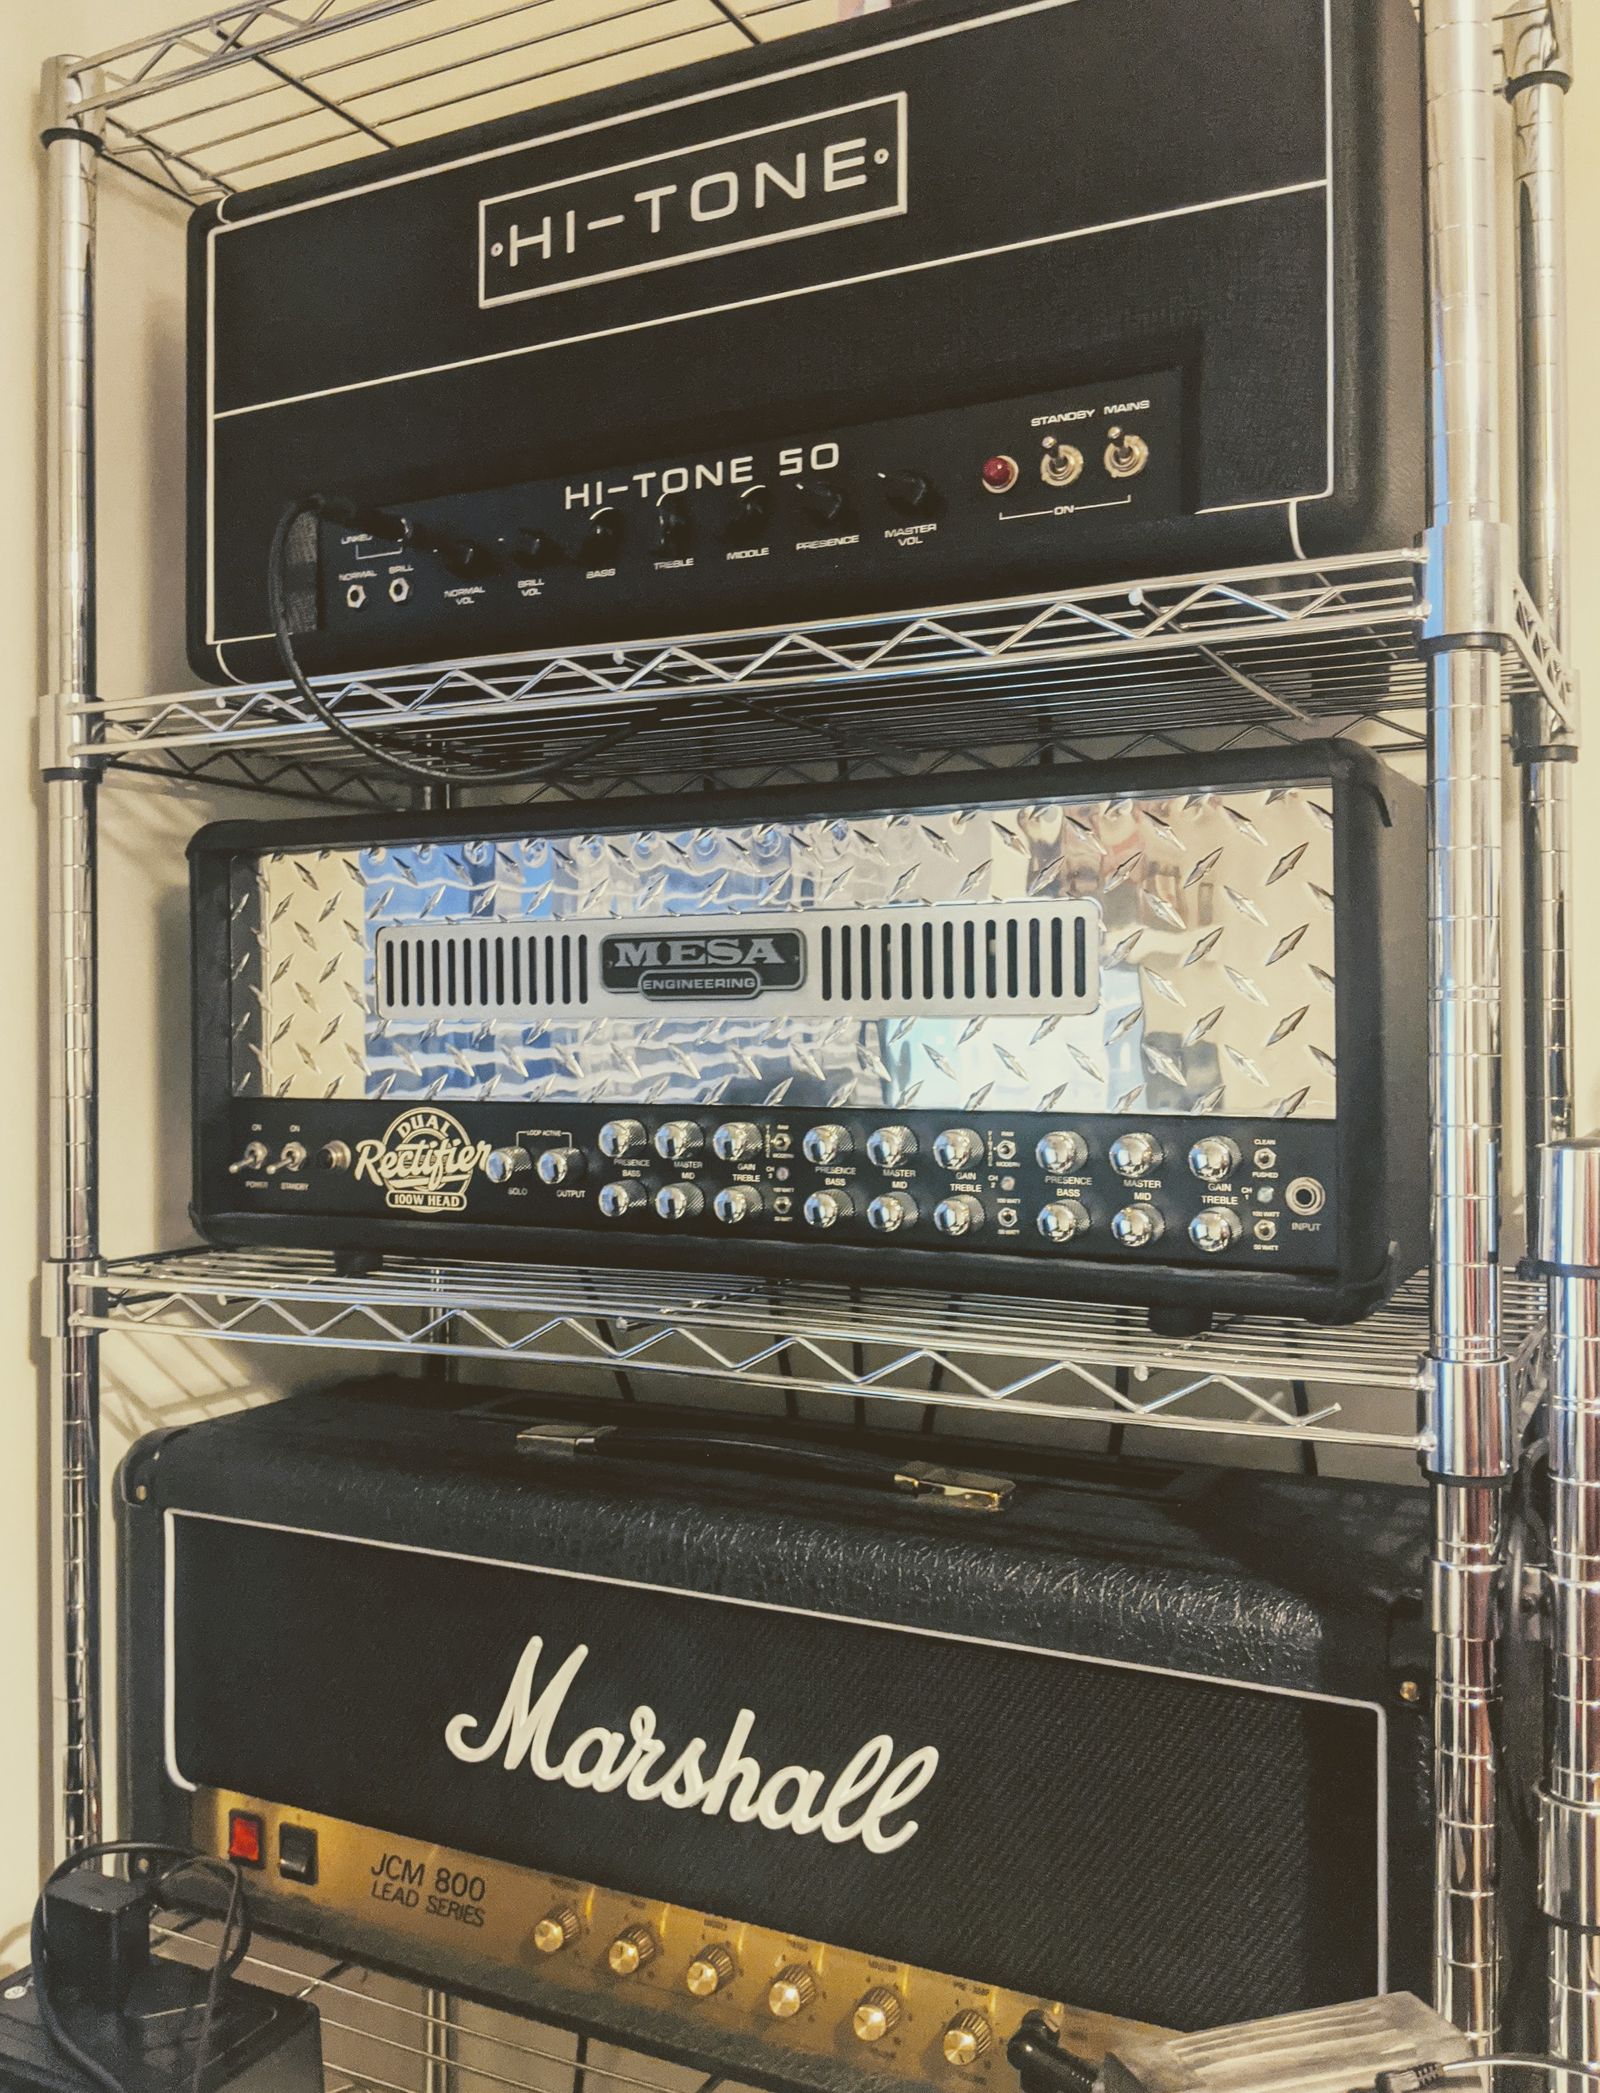 The tower of power - Hi-Tone 50, Mesa Boogie Dual Rectifier and Marshall JCM 800